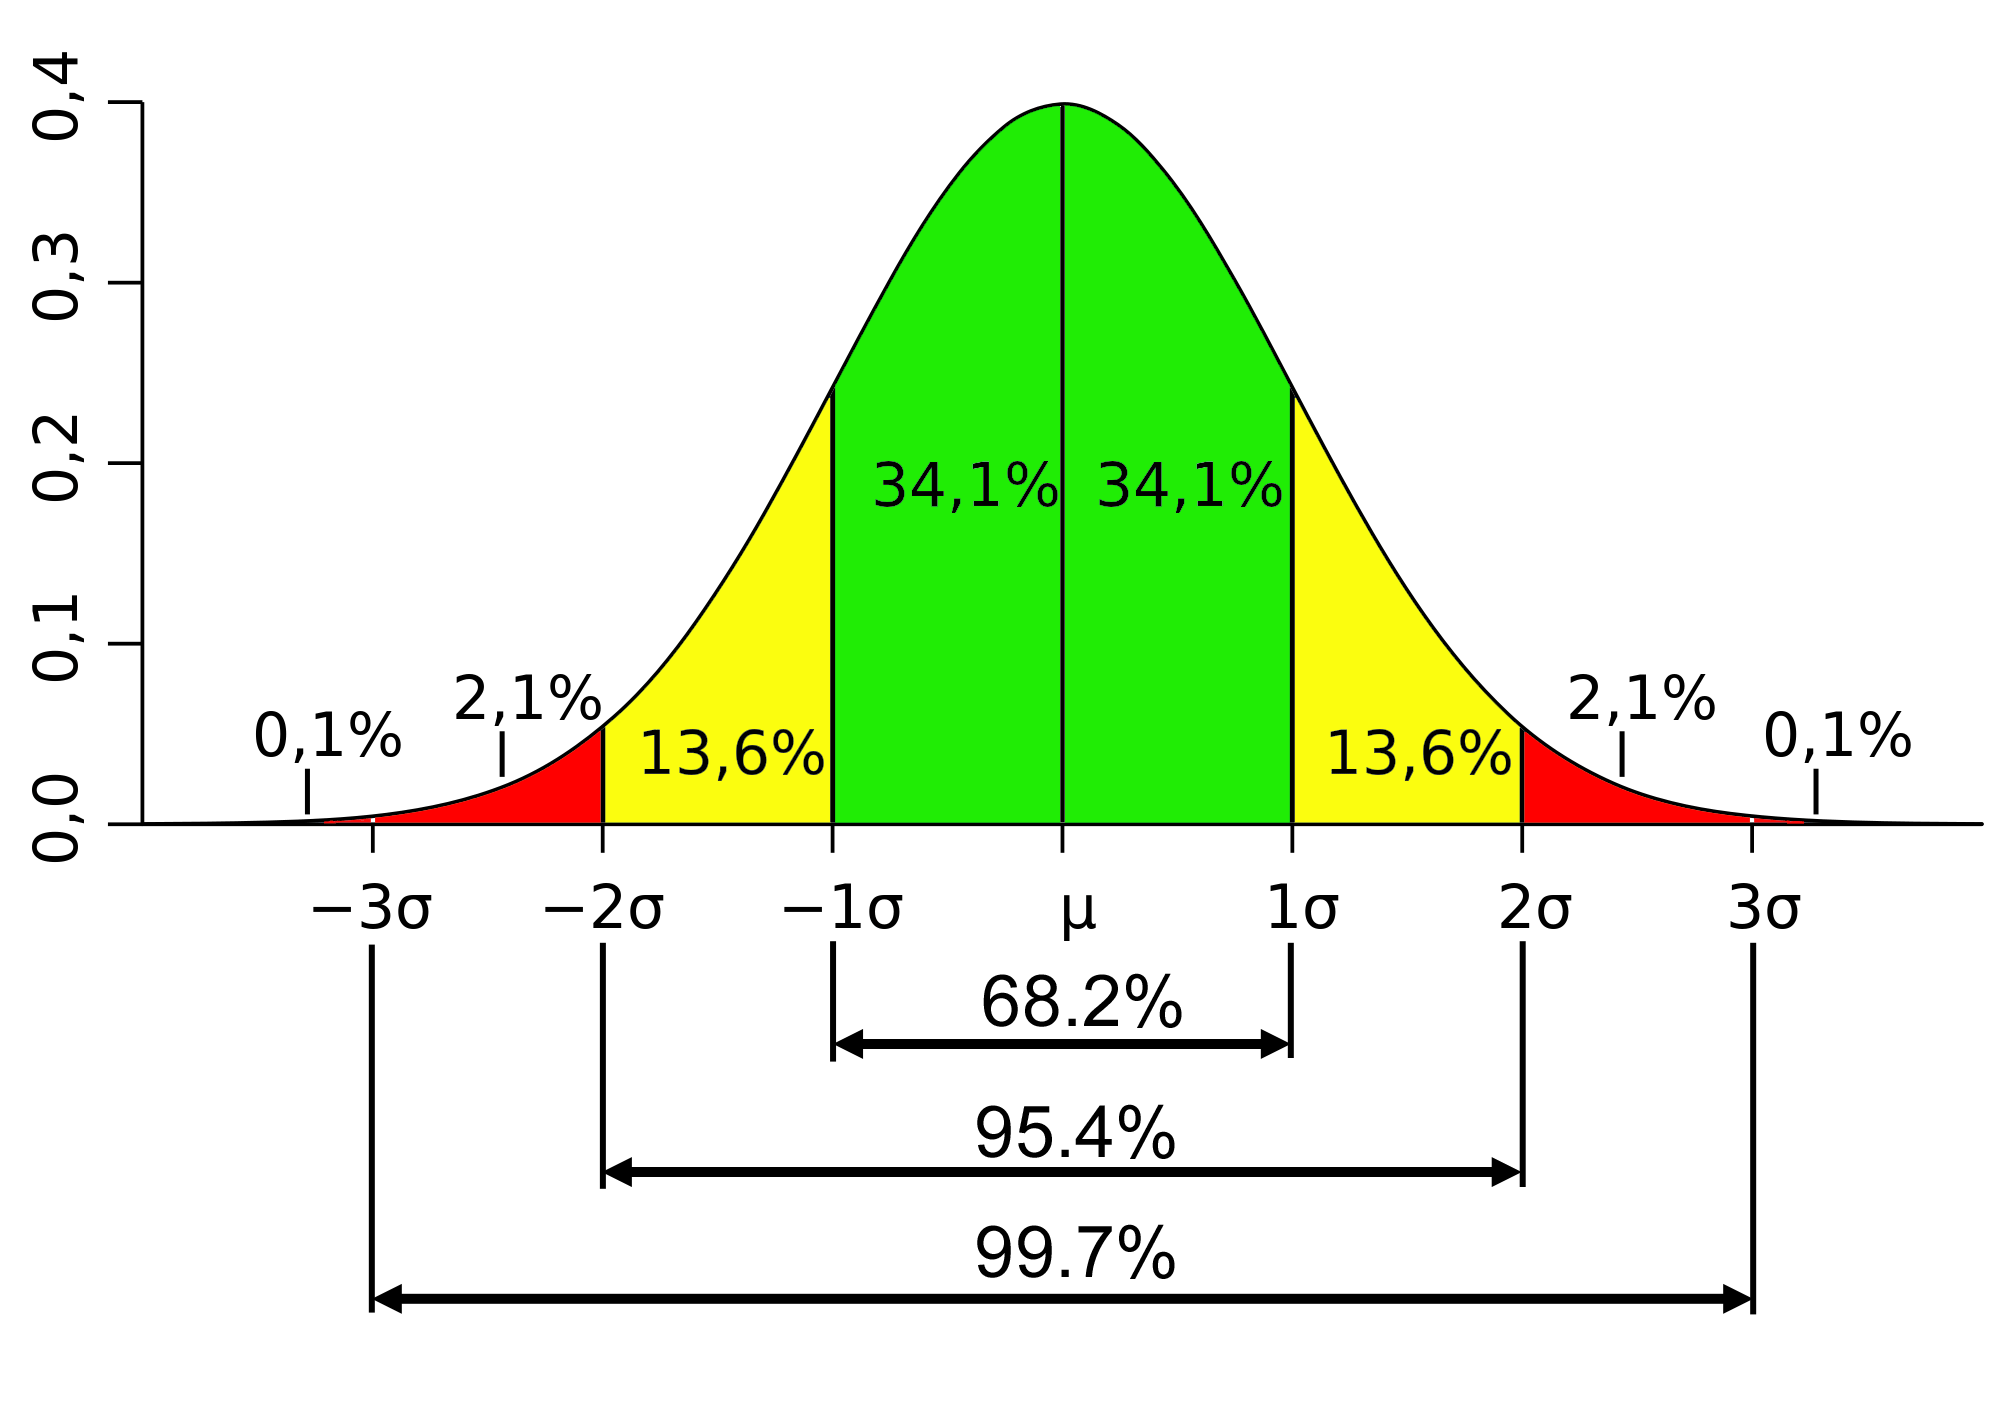 A bell curve of normal distribution, with the mean represented by 'μ' and standard deviation by 'σ'.